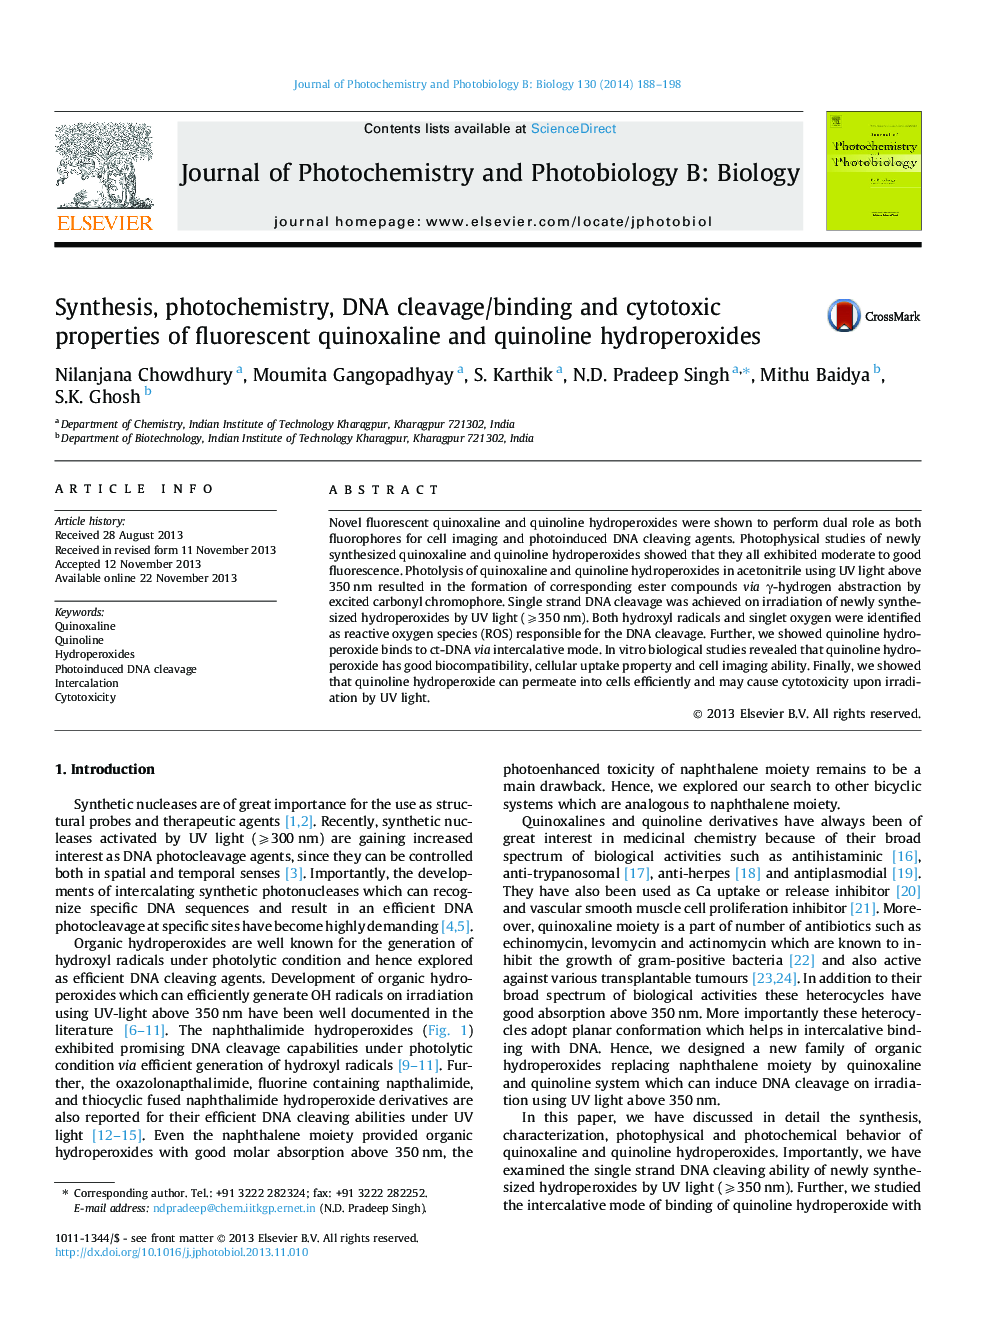 Synthesis, photochemistry, DNA cleavage/binding and cytotoxic properties of fluorescent quinoxaline and quinoline hydroperoxides